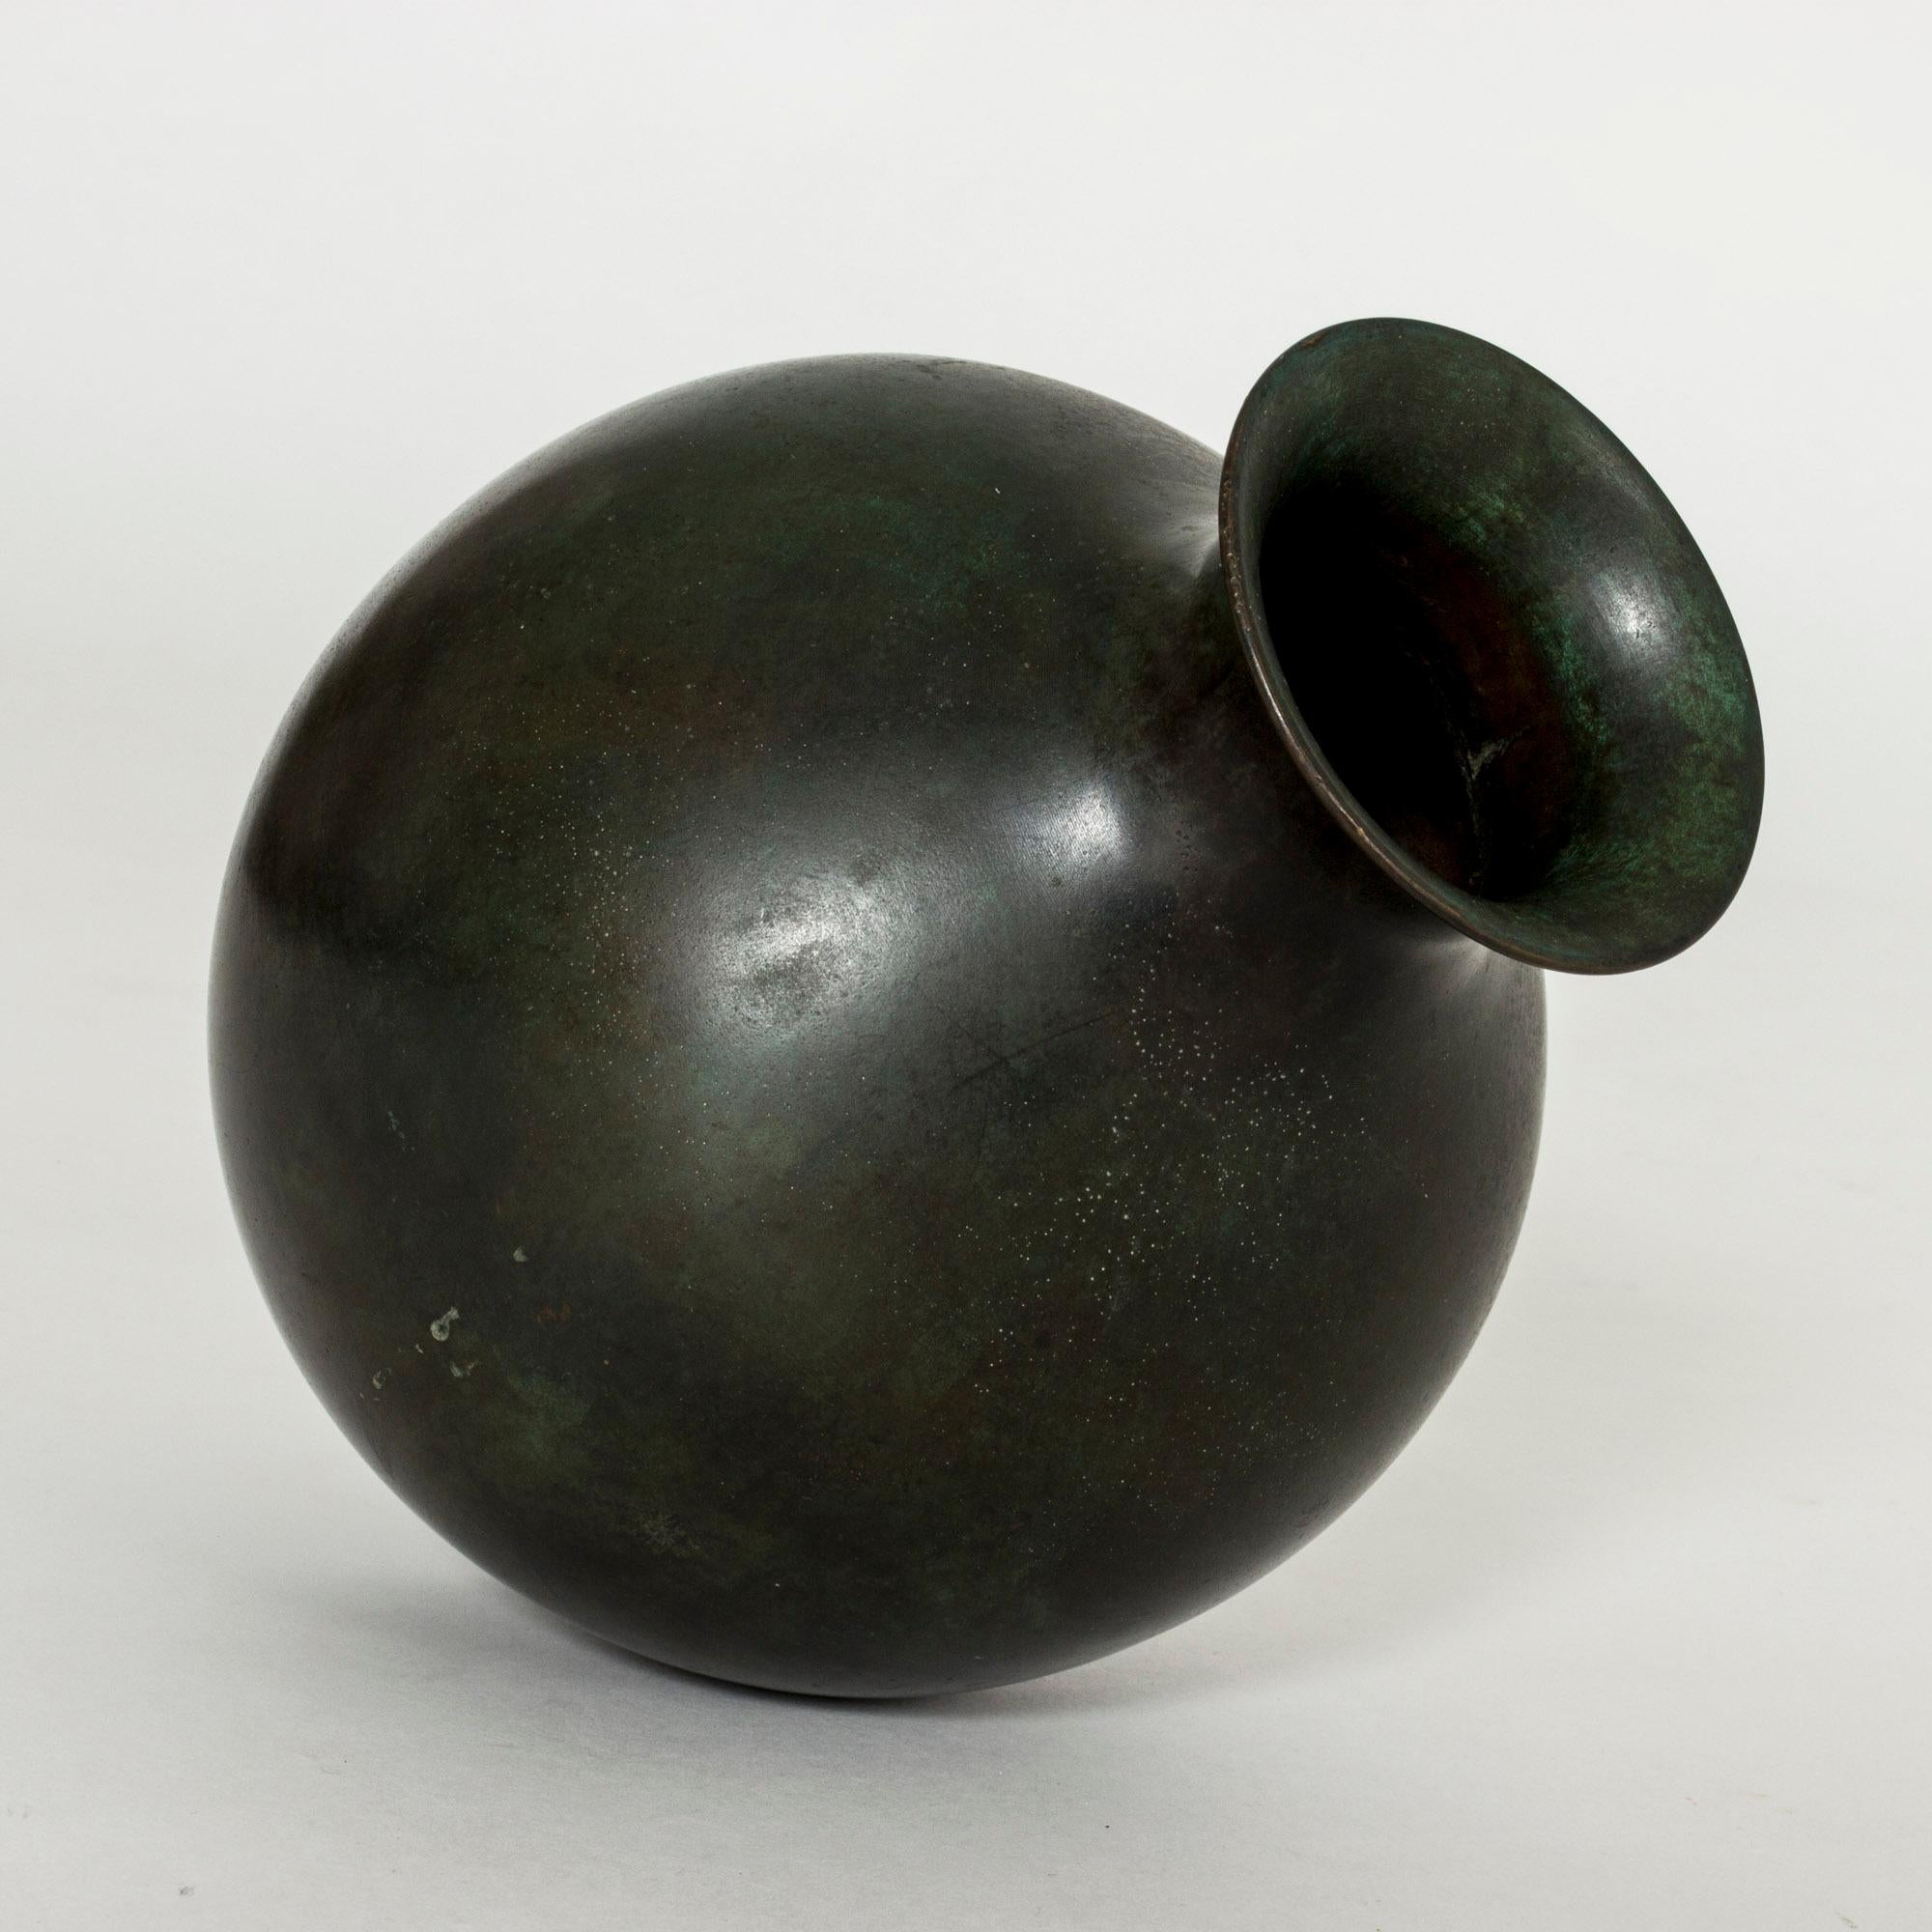 Elegant patinated bronze vase from GAB, in a smooth, plump design. Deep green, shifting color, heavy quality.